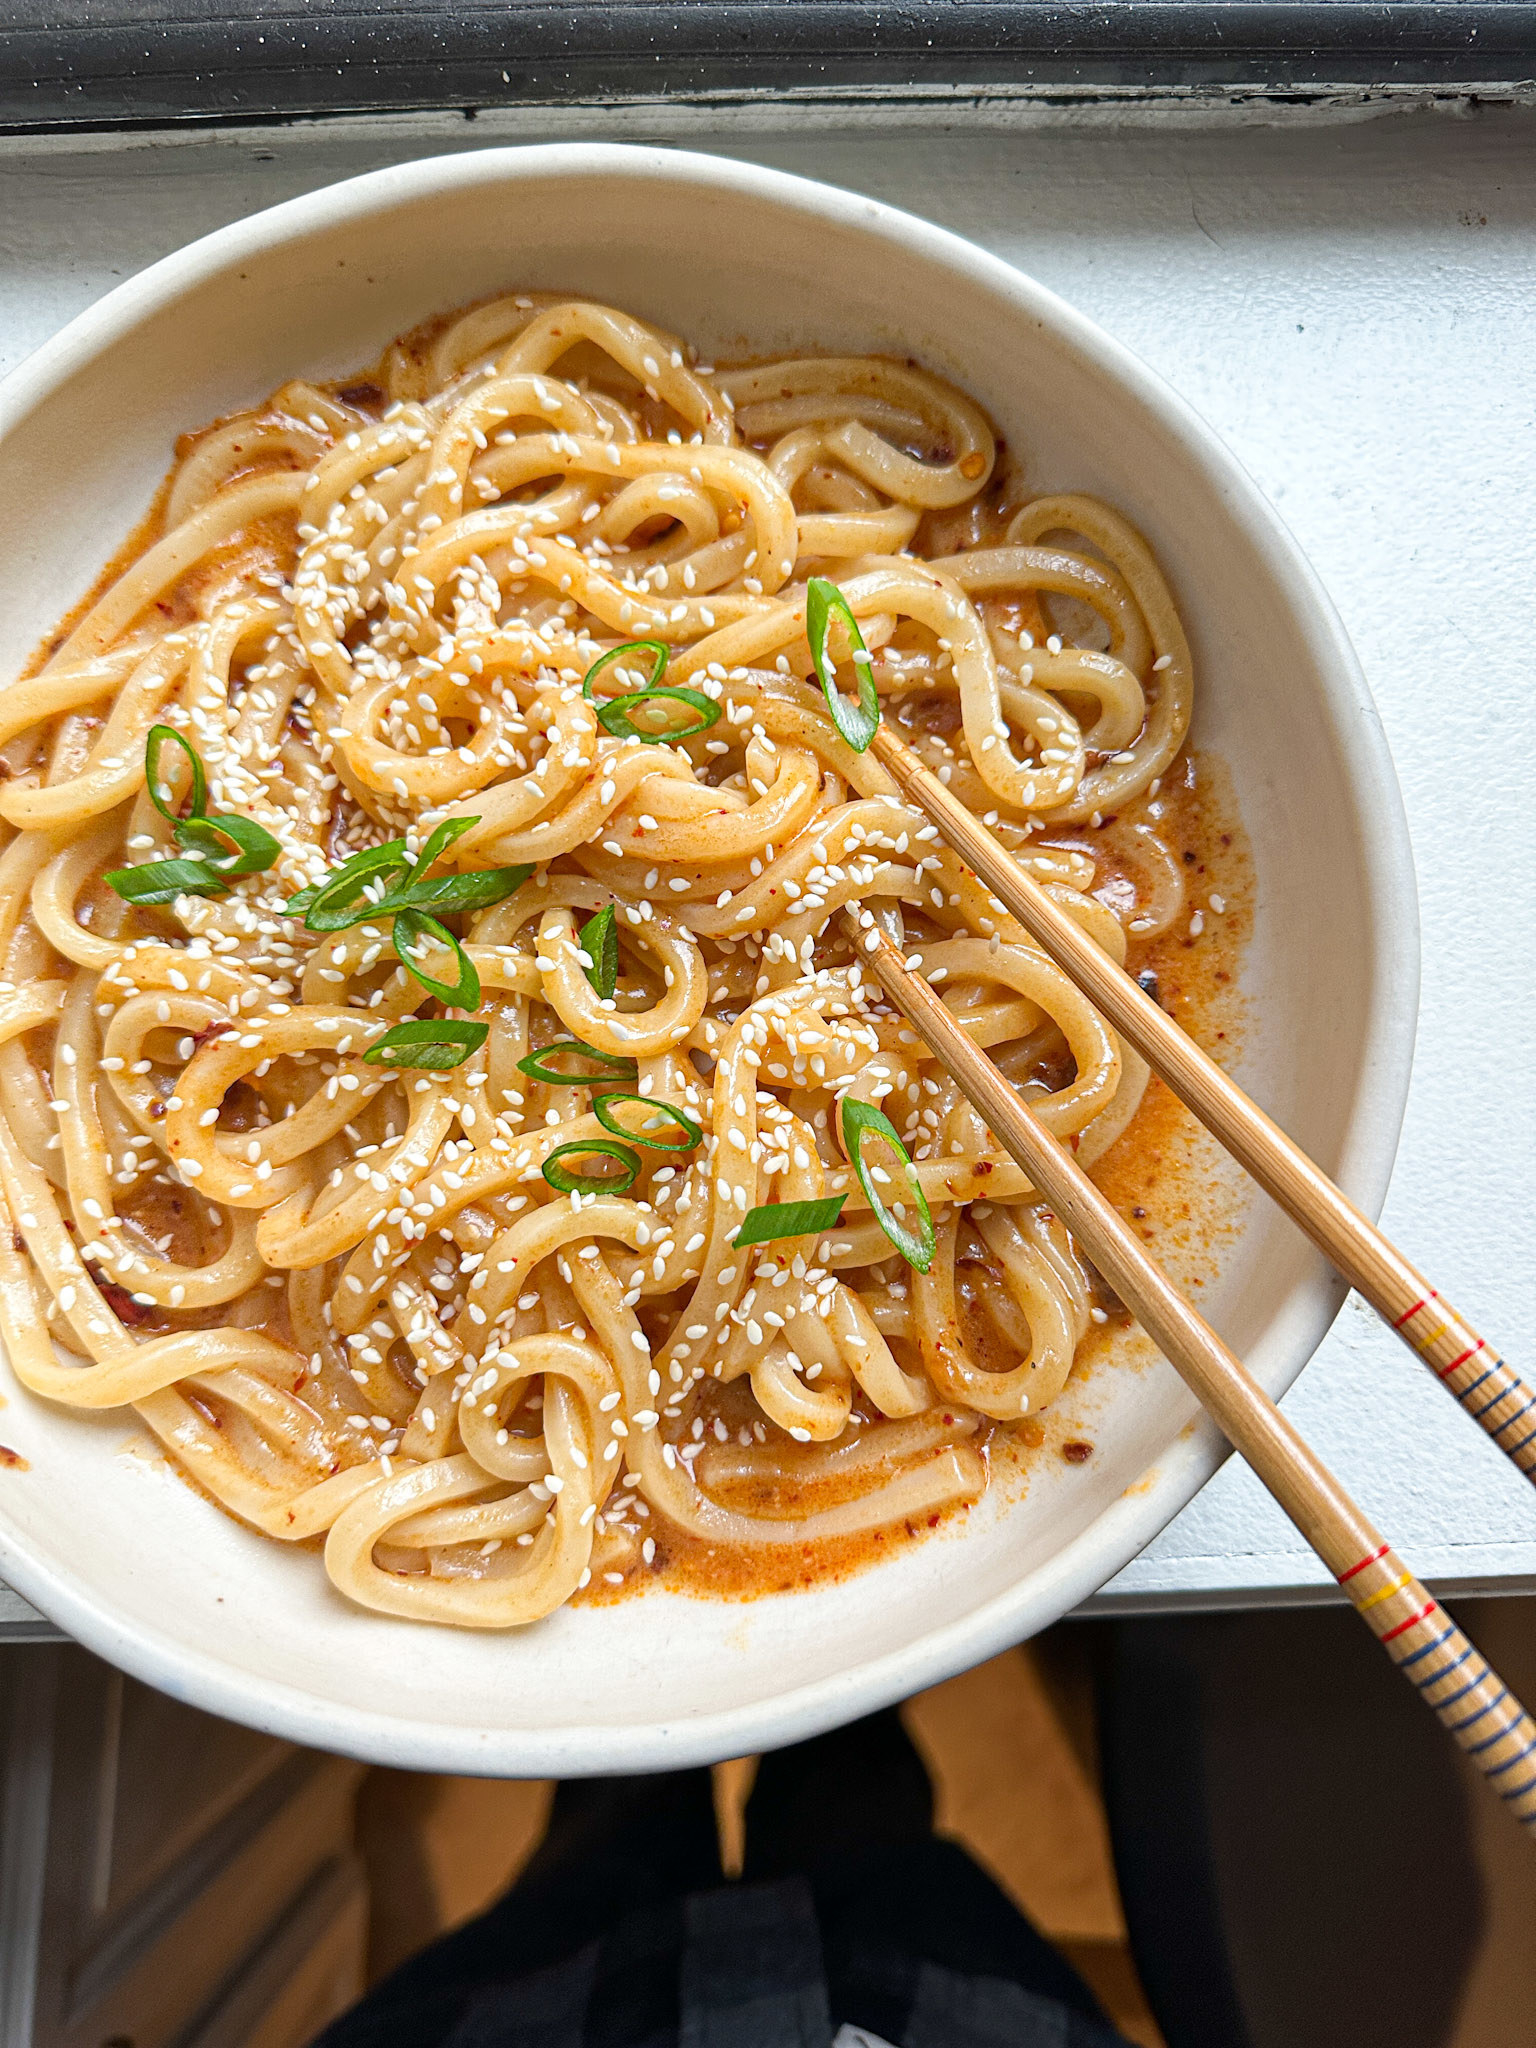 udon noodles in a bowl with scallion and sesame seed garnish